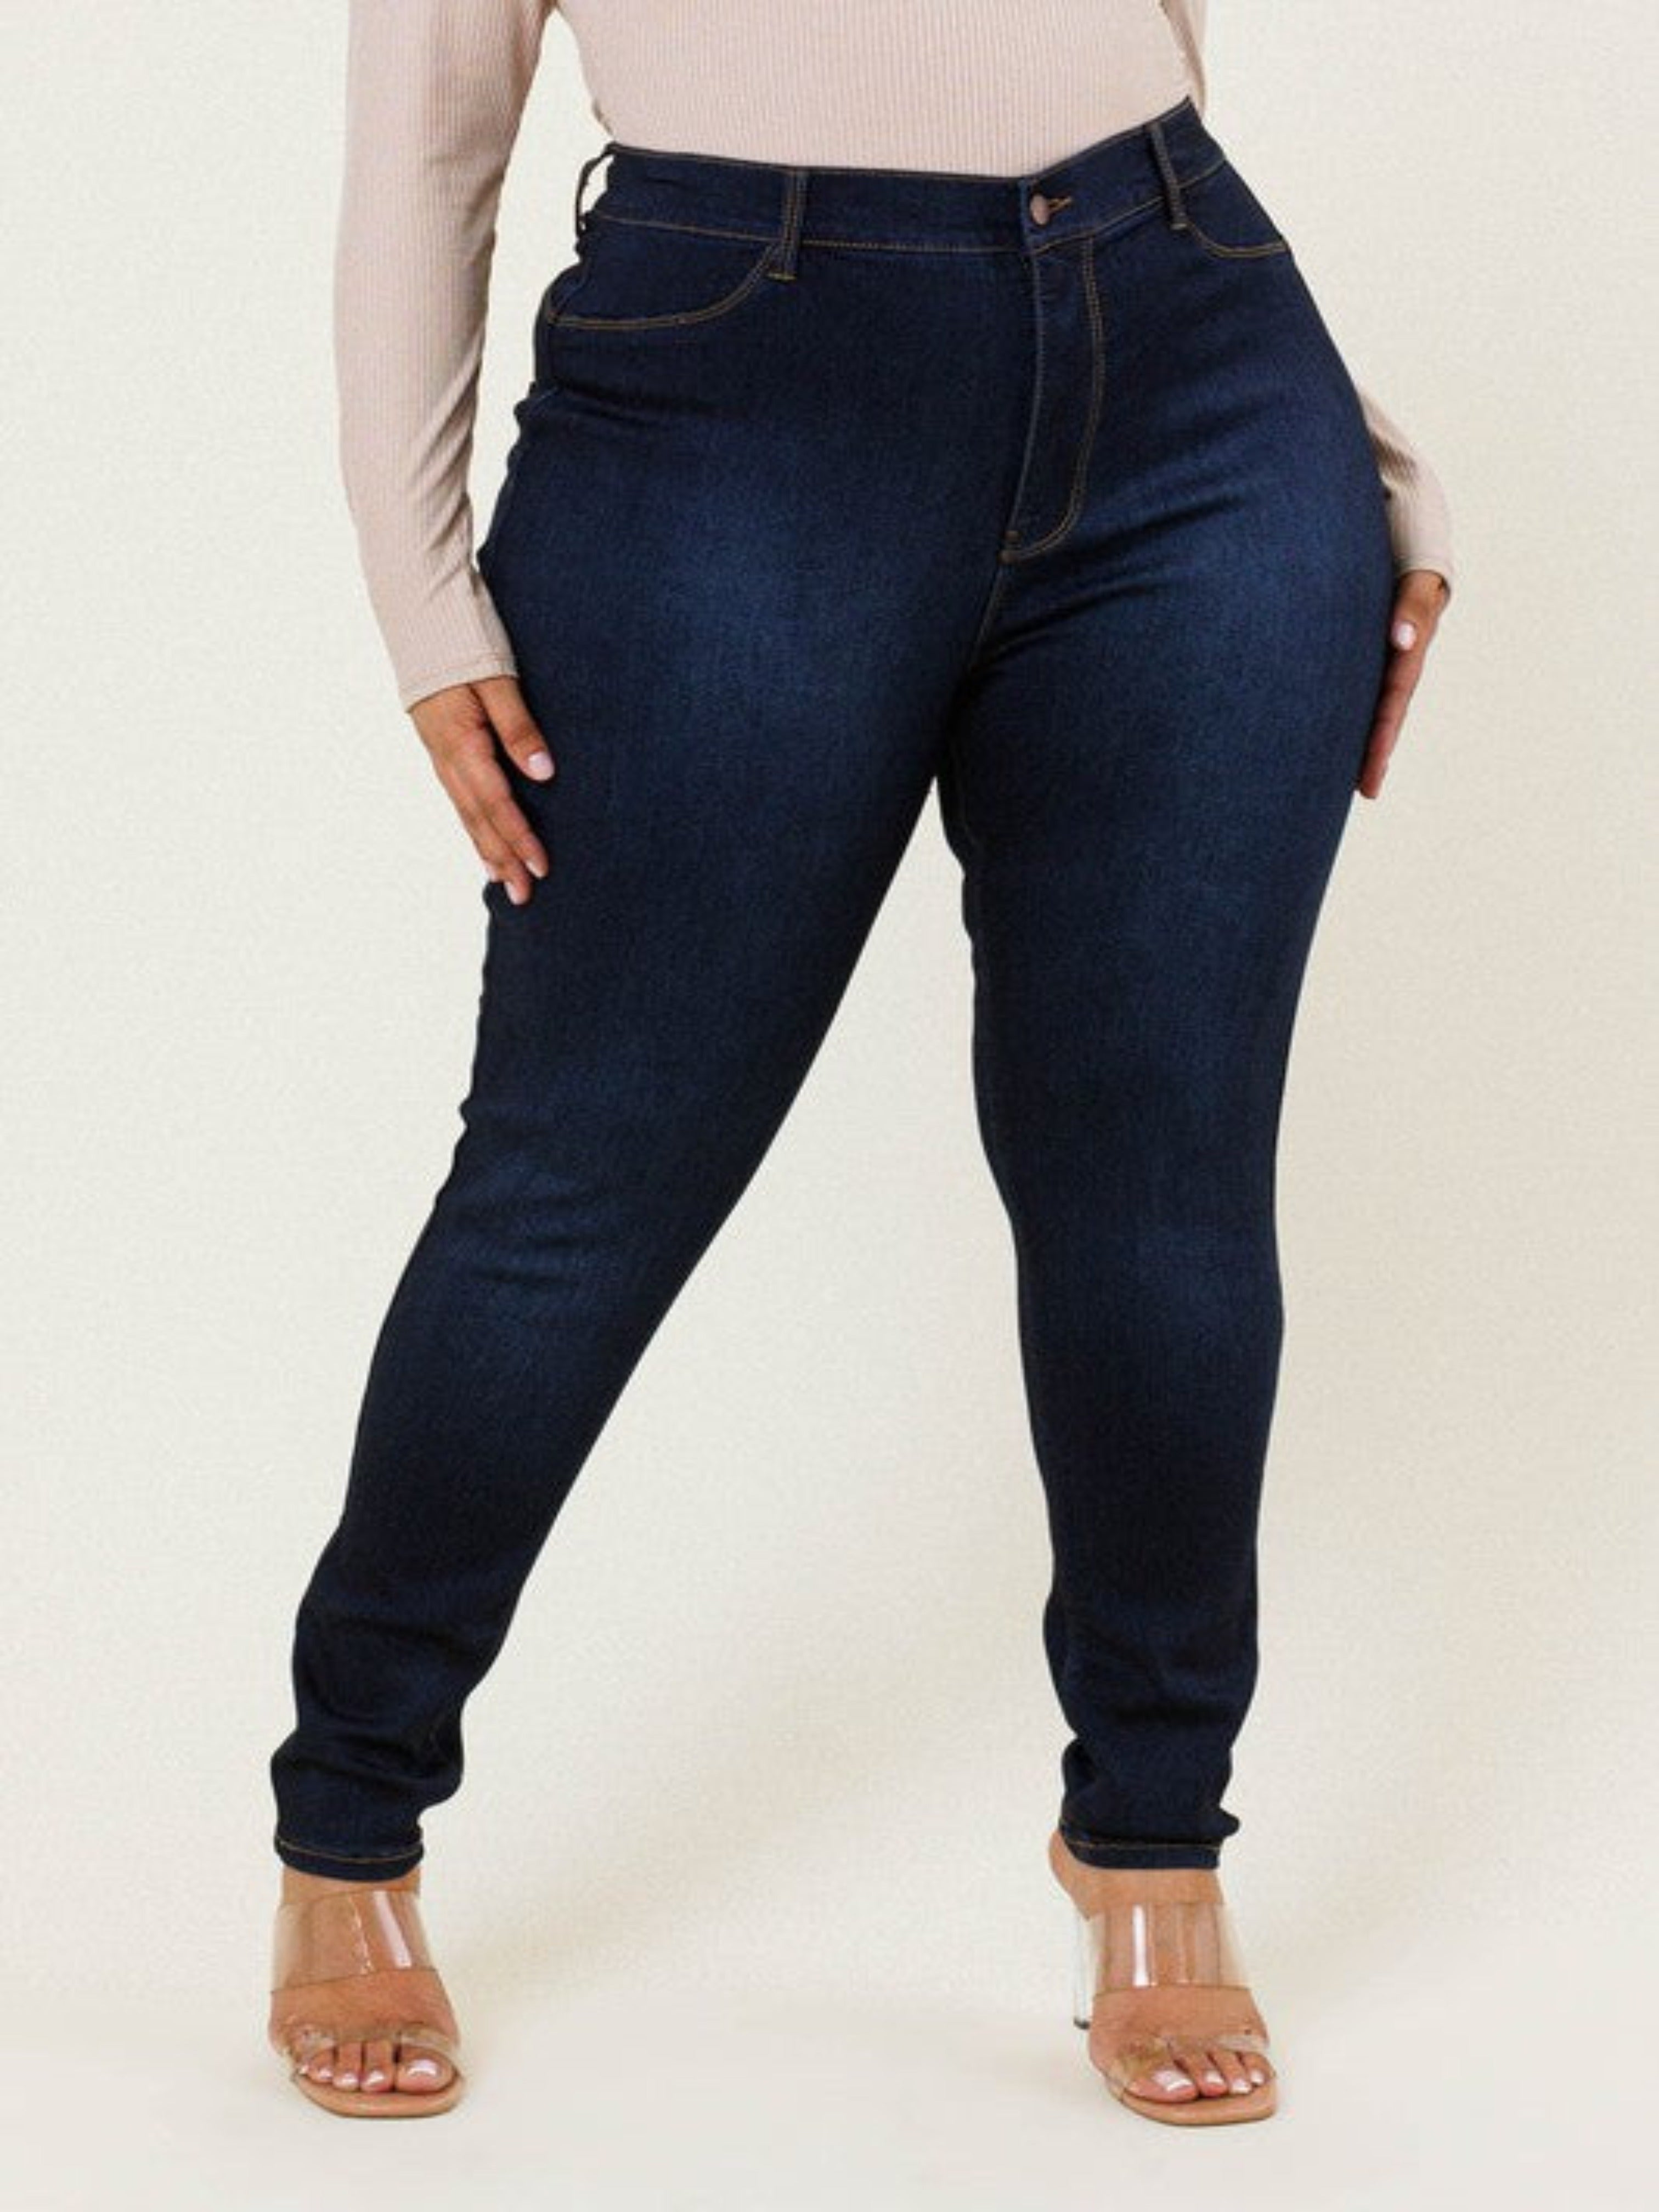 Perfect Pair Jeans